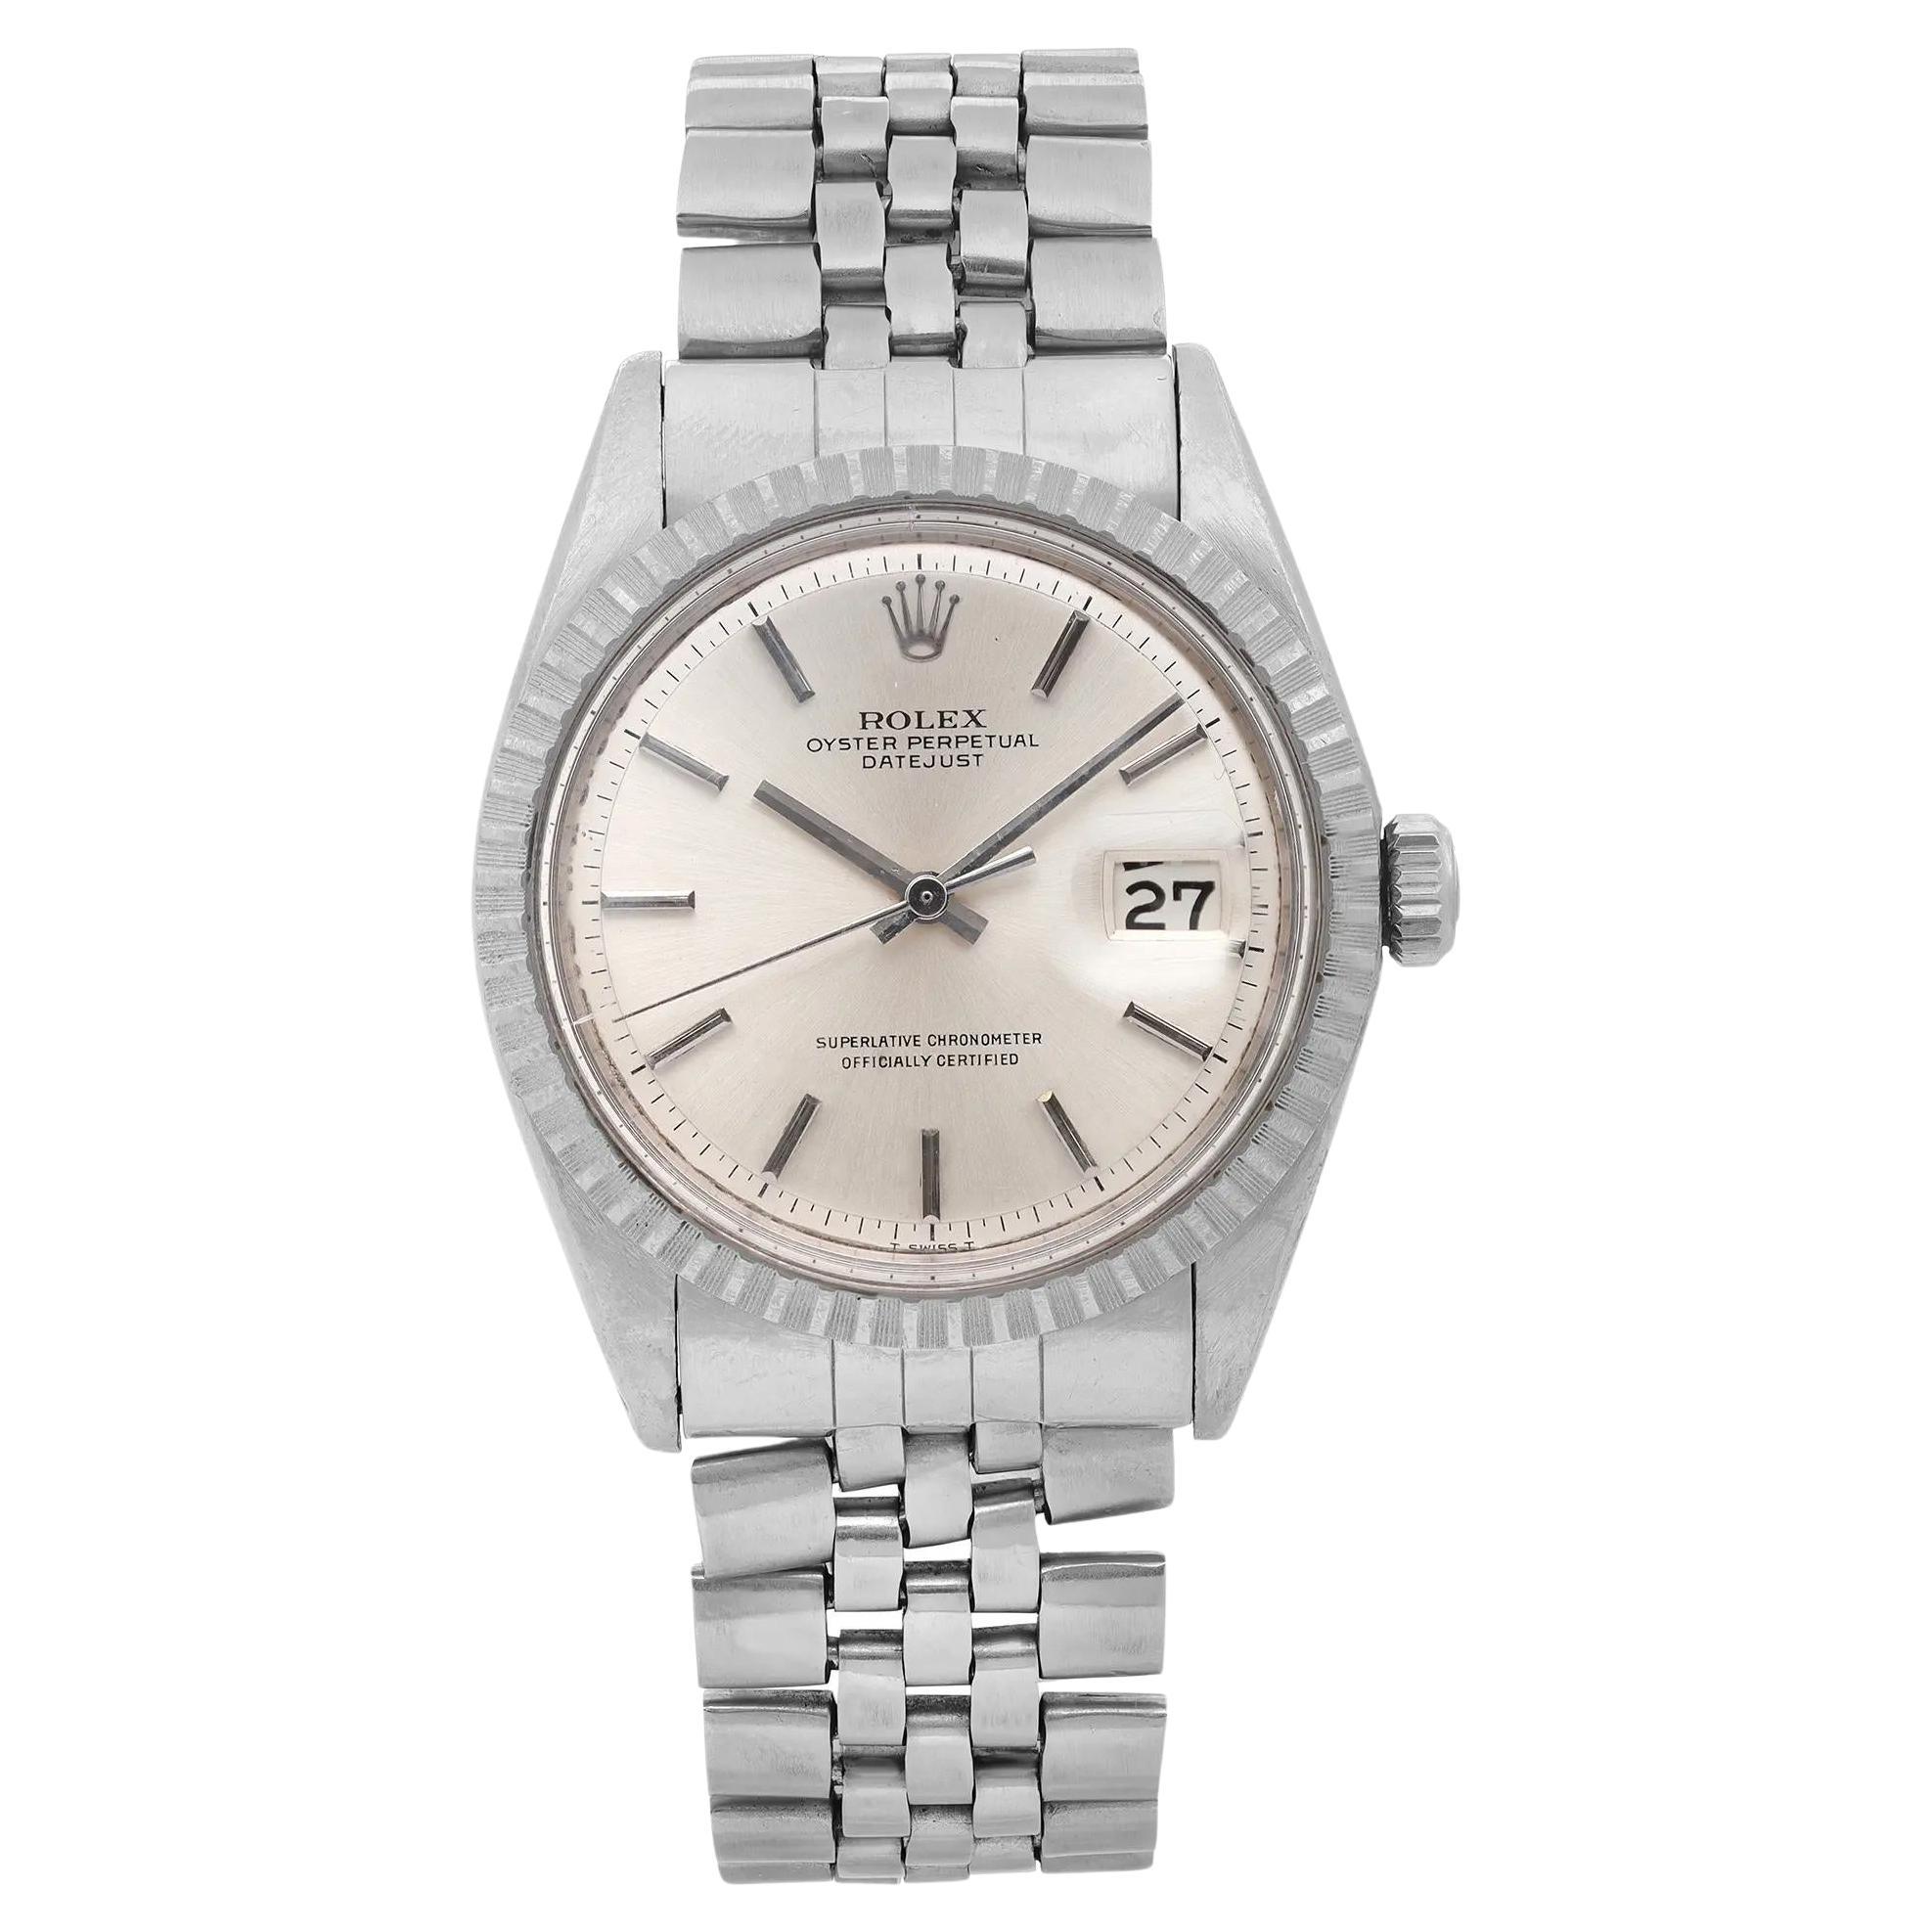 Rolex Datejust Stainless Steel Silver Dial Automatic Men Watch 1601 For Sale